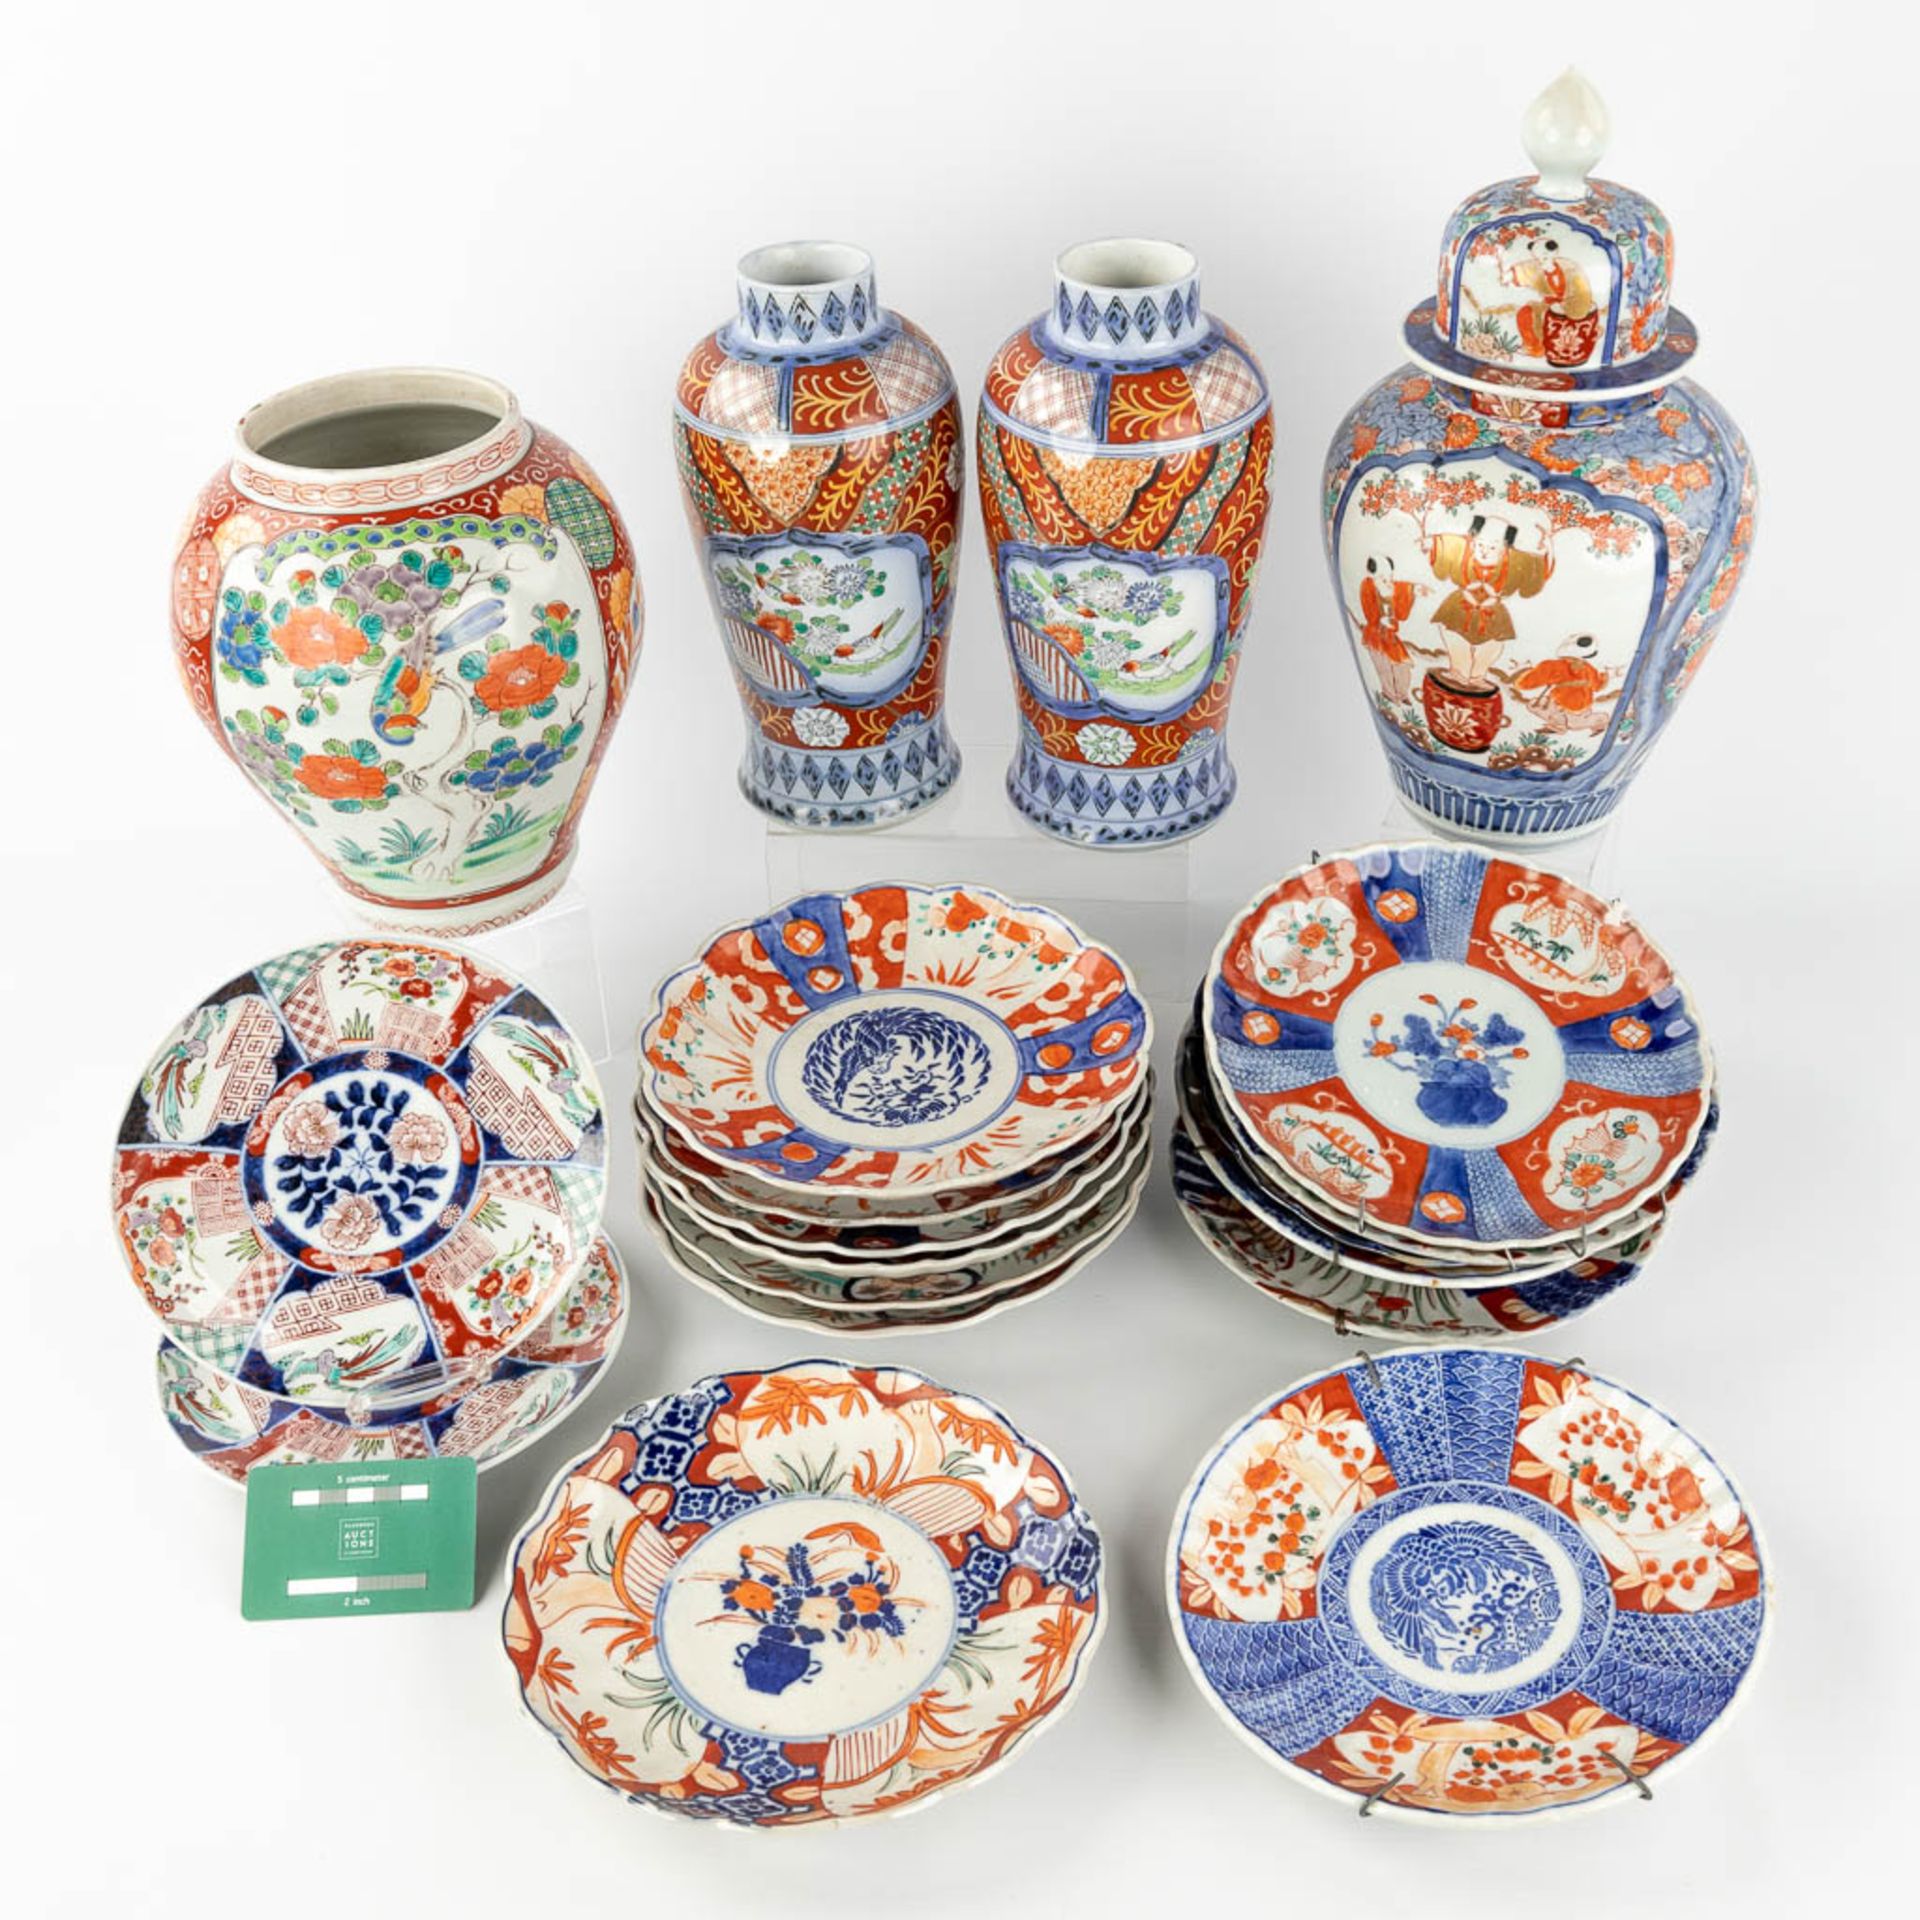 An assembled collection of Japanese Imari and Kutani porcelain. 19th/20th century. (H: 35 x D: 19 cm - Image 2 of 22